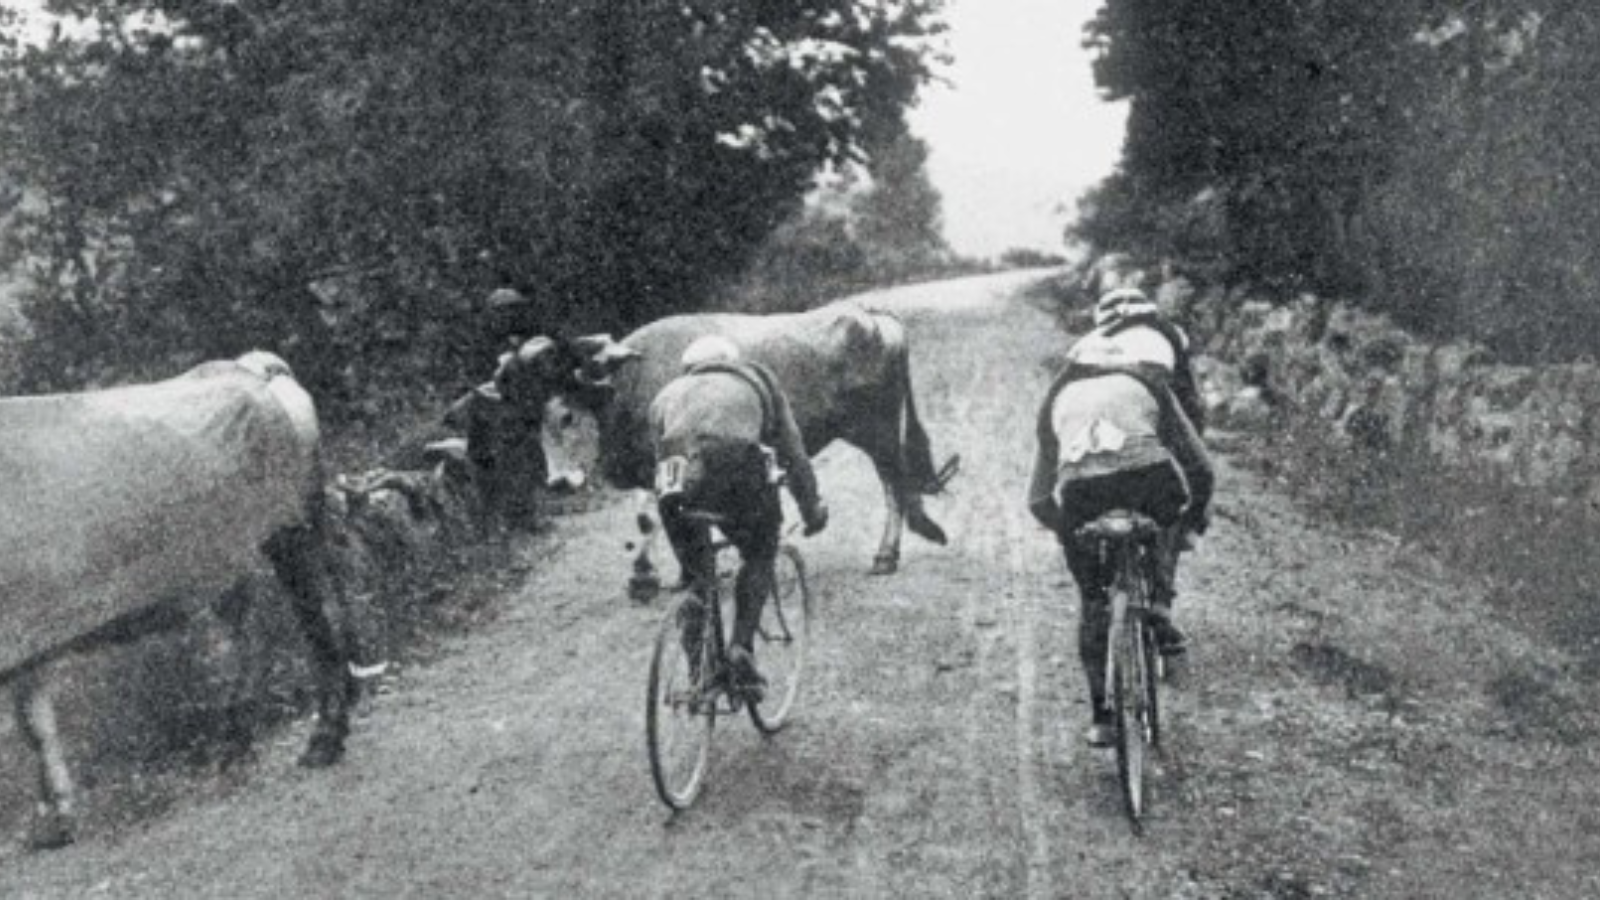 Two cyclists have to pass by two cows on the untarmacied road during Tour de France 1910